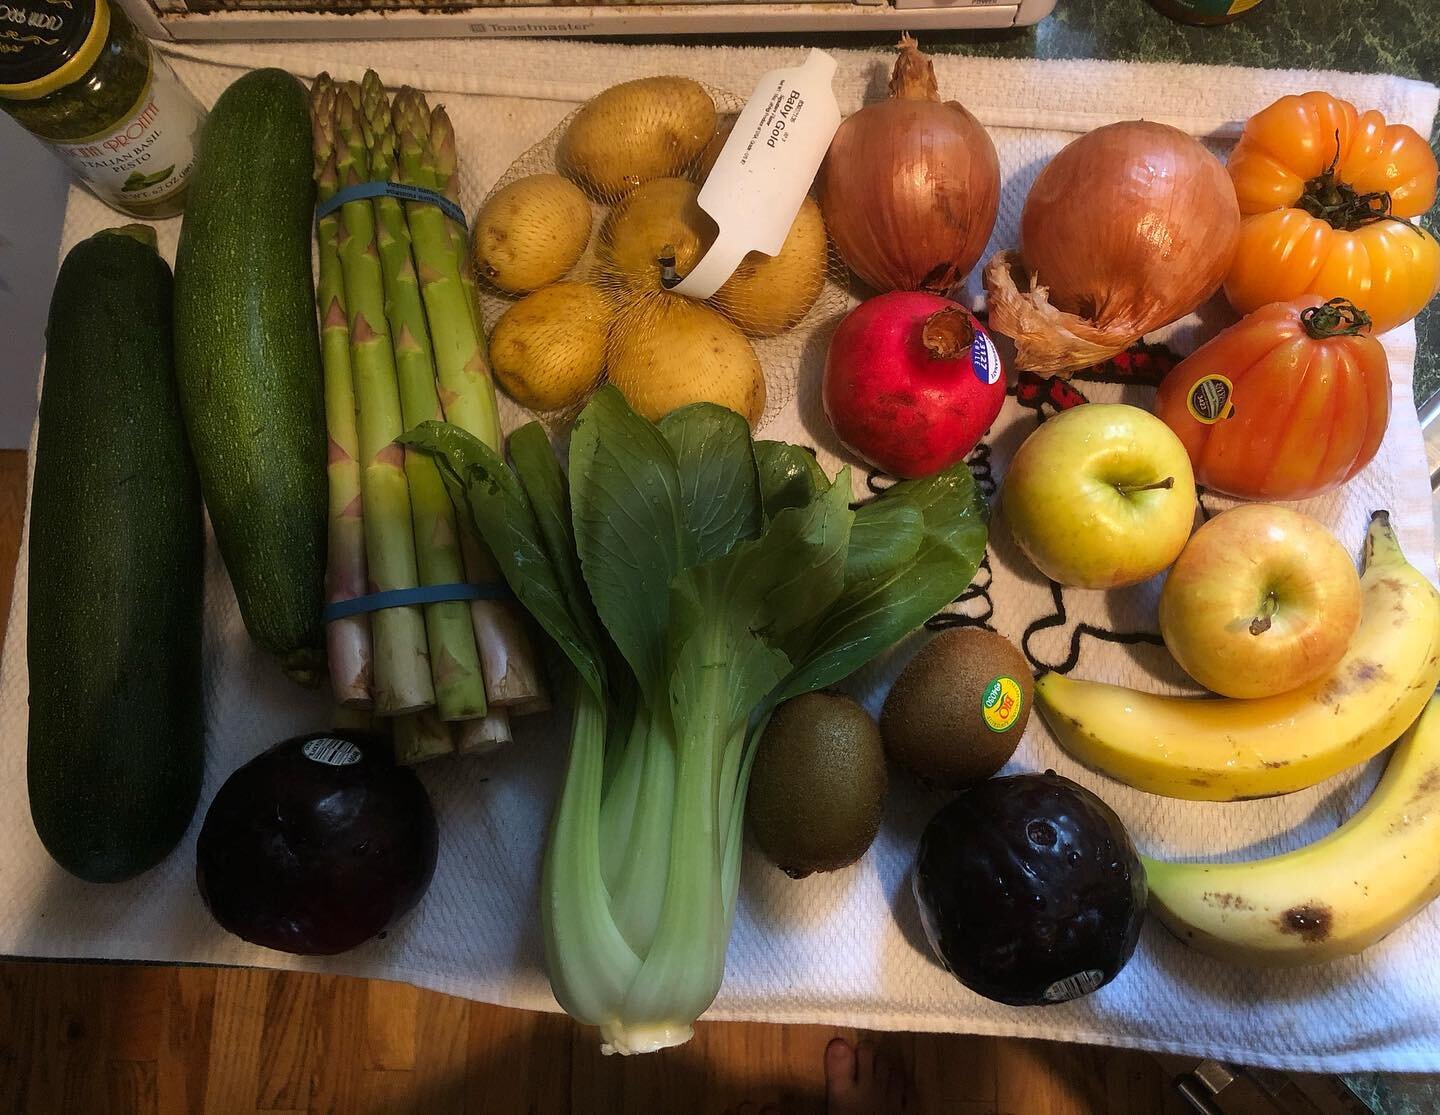 Today&rsquo;s @hungryharvest delivery, unboxed and washed. I don&rsquo;t know how I&rsquo;d be getting through this quarantine without them. Highly recommend signing up for their waiting list!